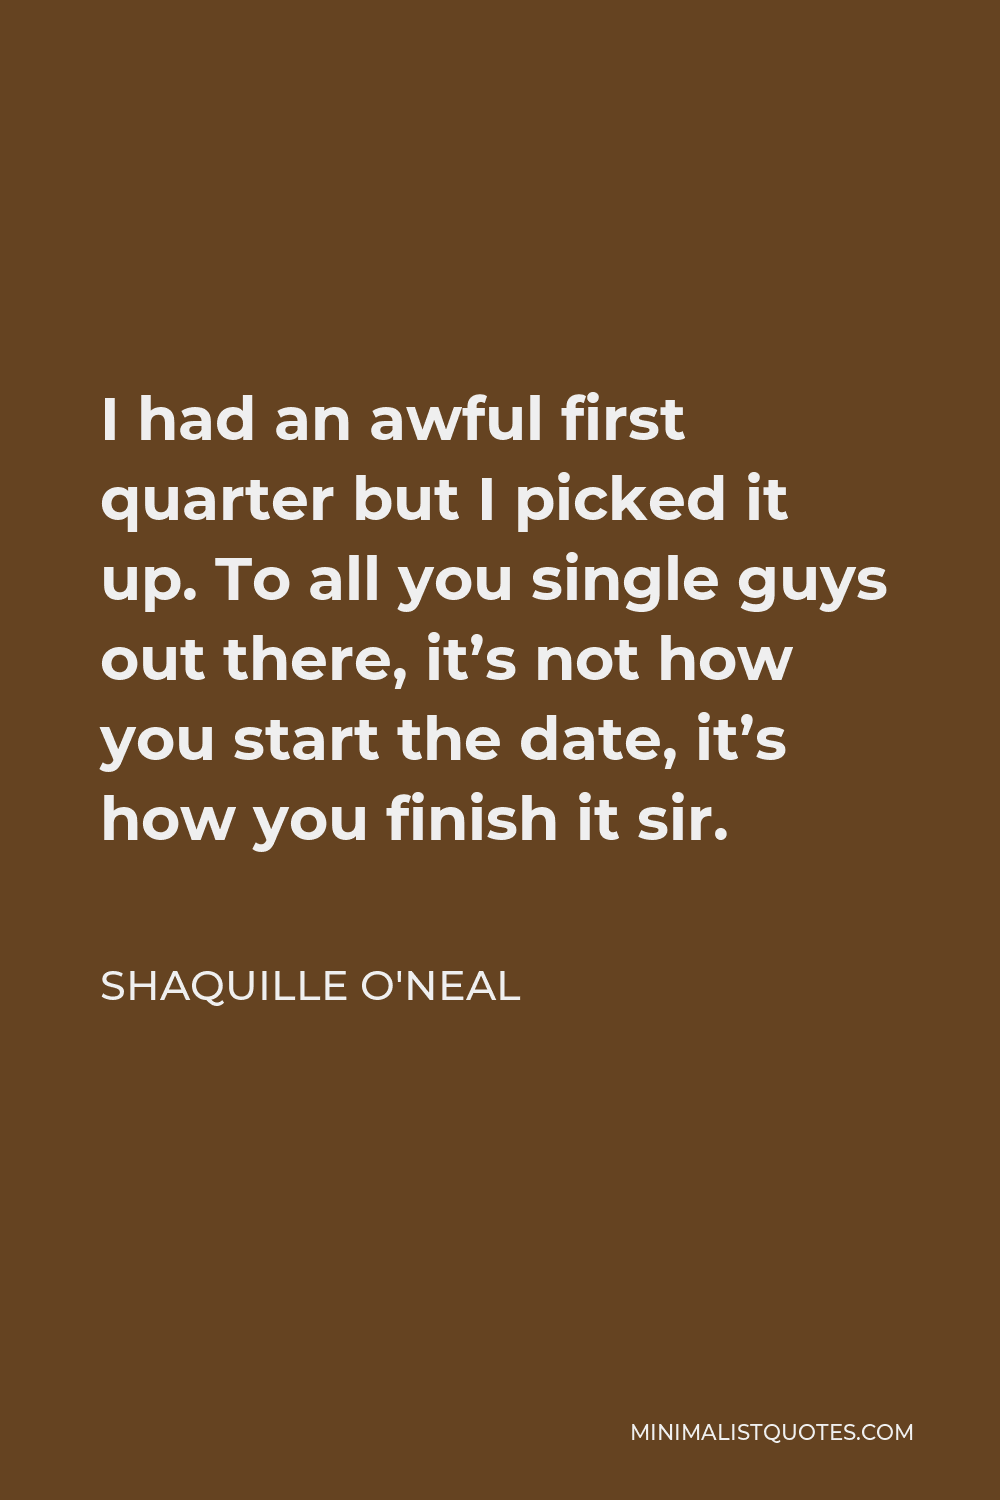 Shaquille O'Neal Quote - I had an awful first quarter but I picked it up. To all you single guys out there, it’s not how you start the date, it’s how you finish it sir.